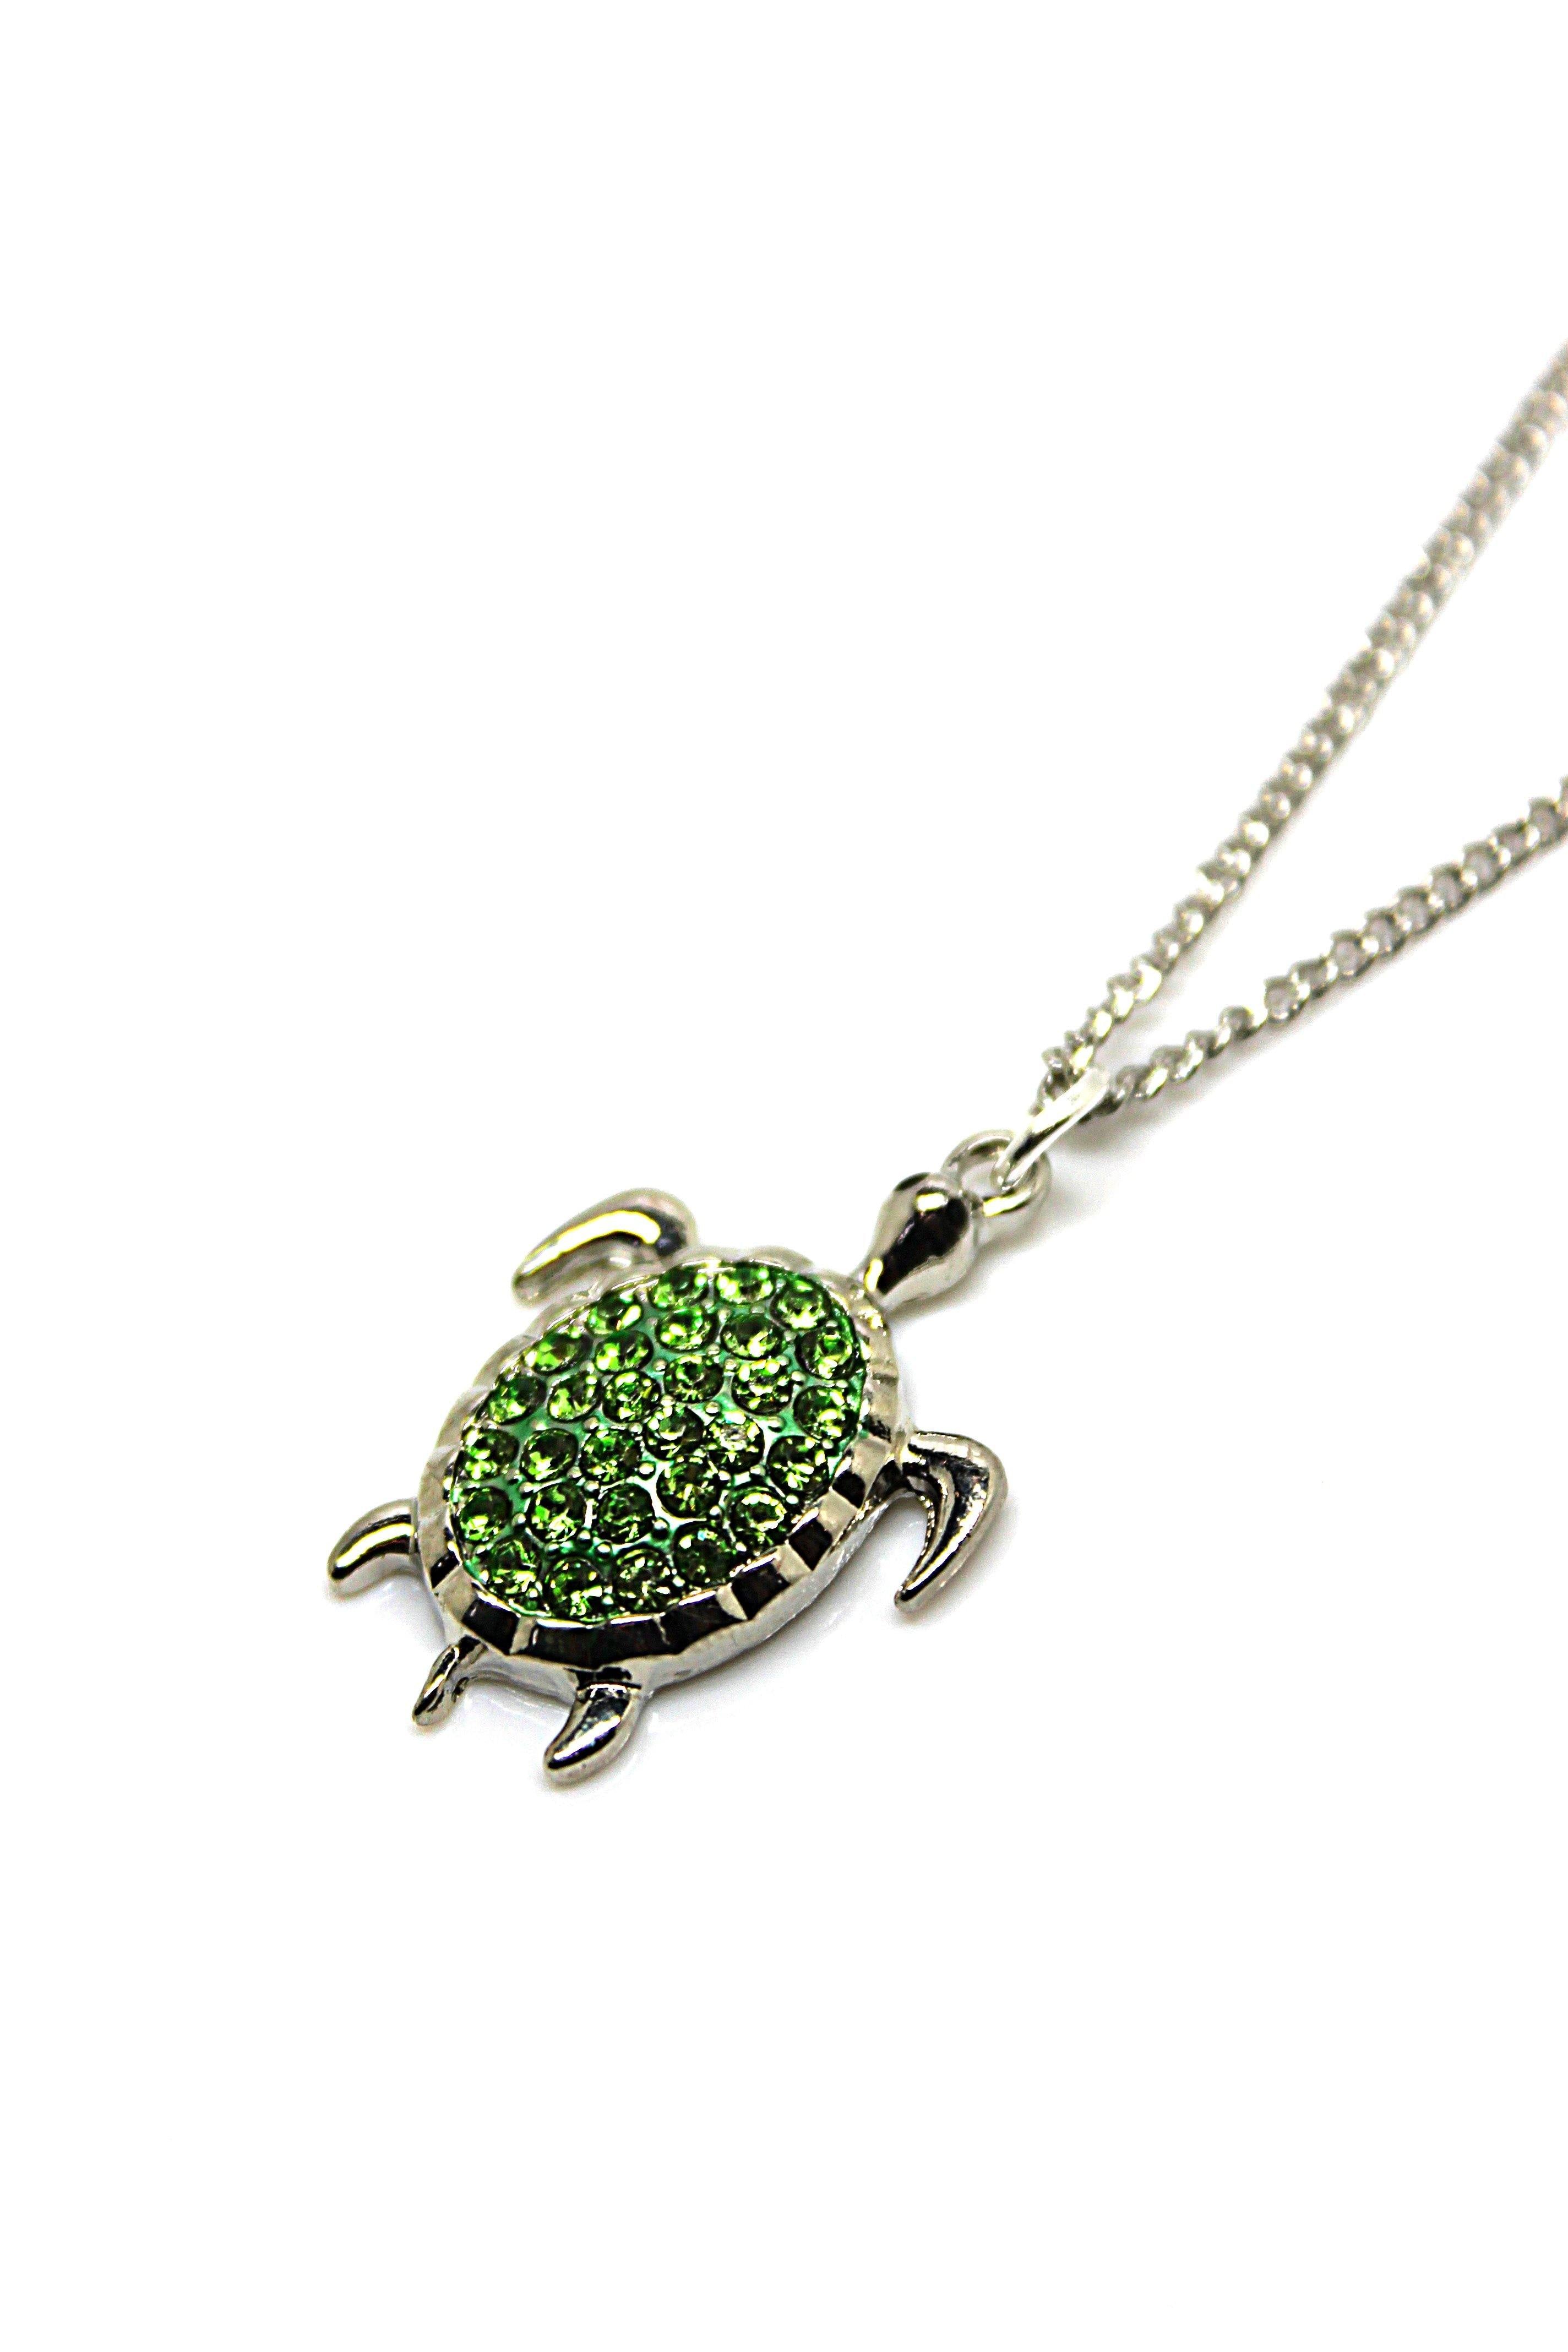 Turtle Small Necklace - Wildtouch - Wildtouch